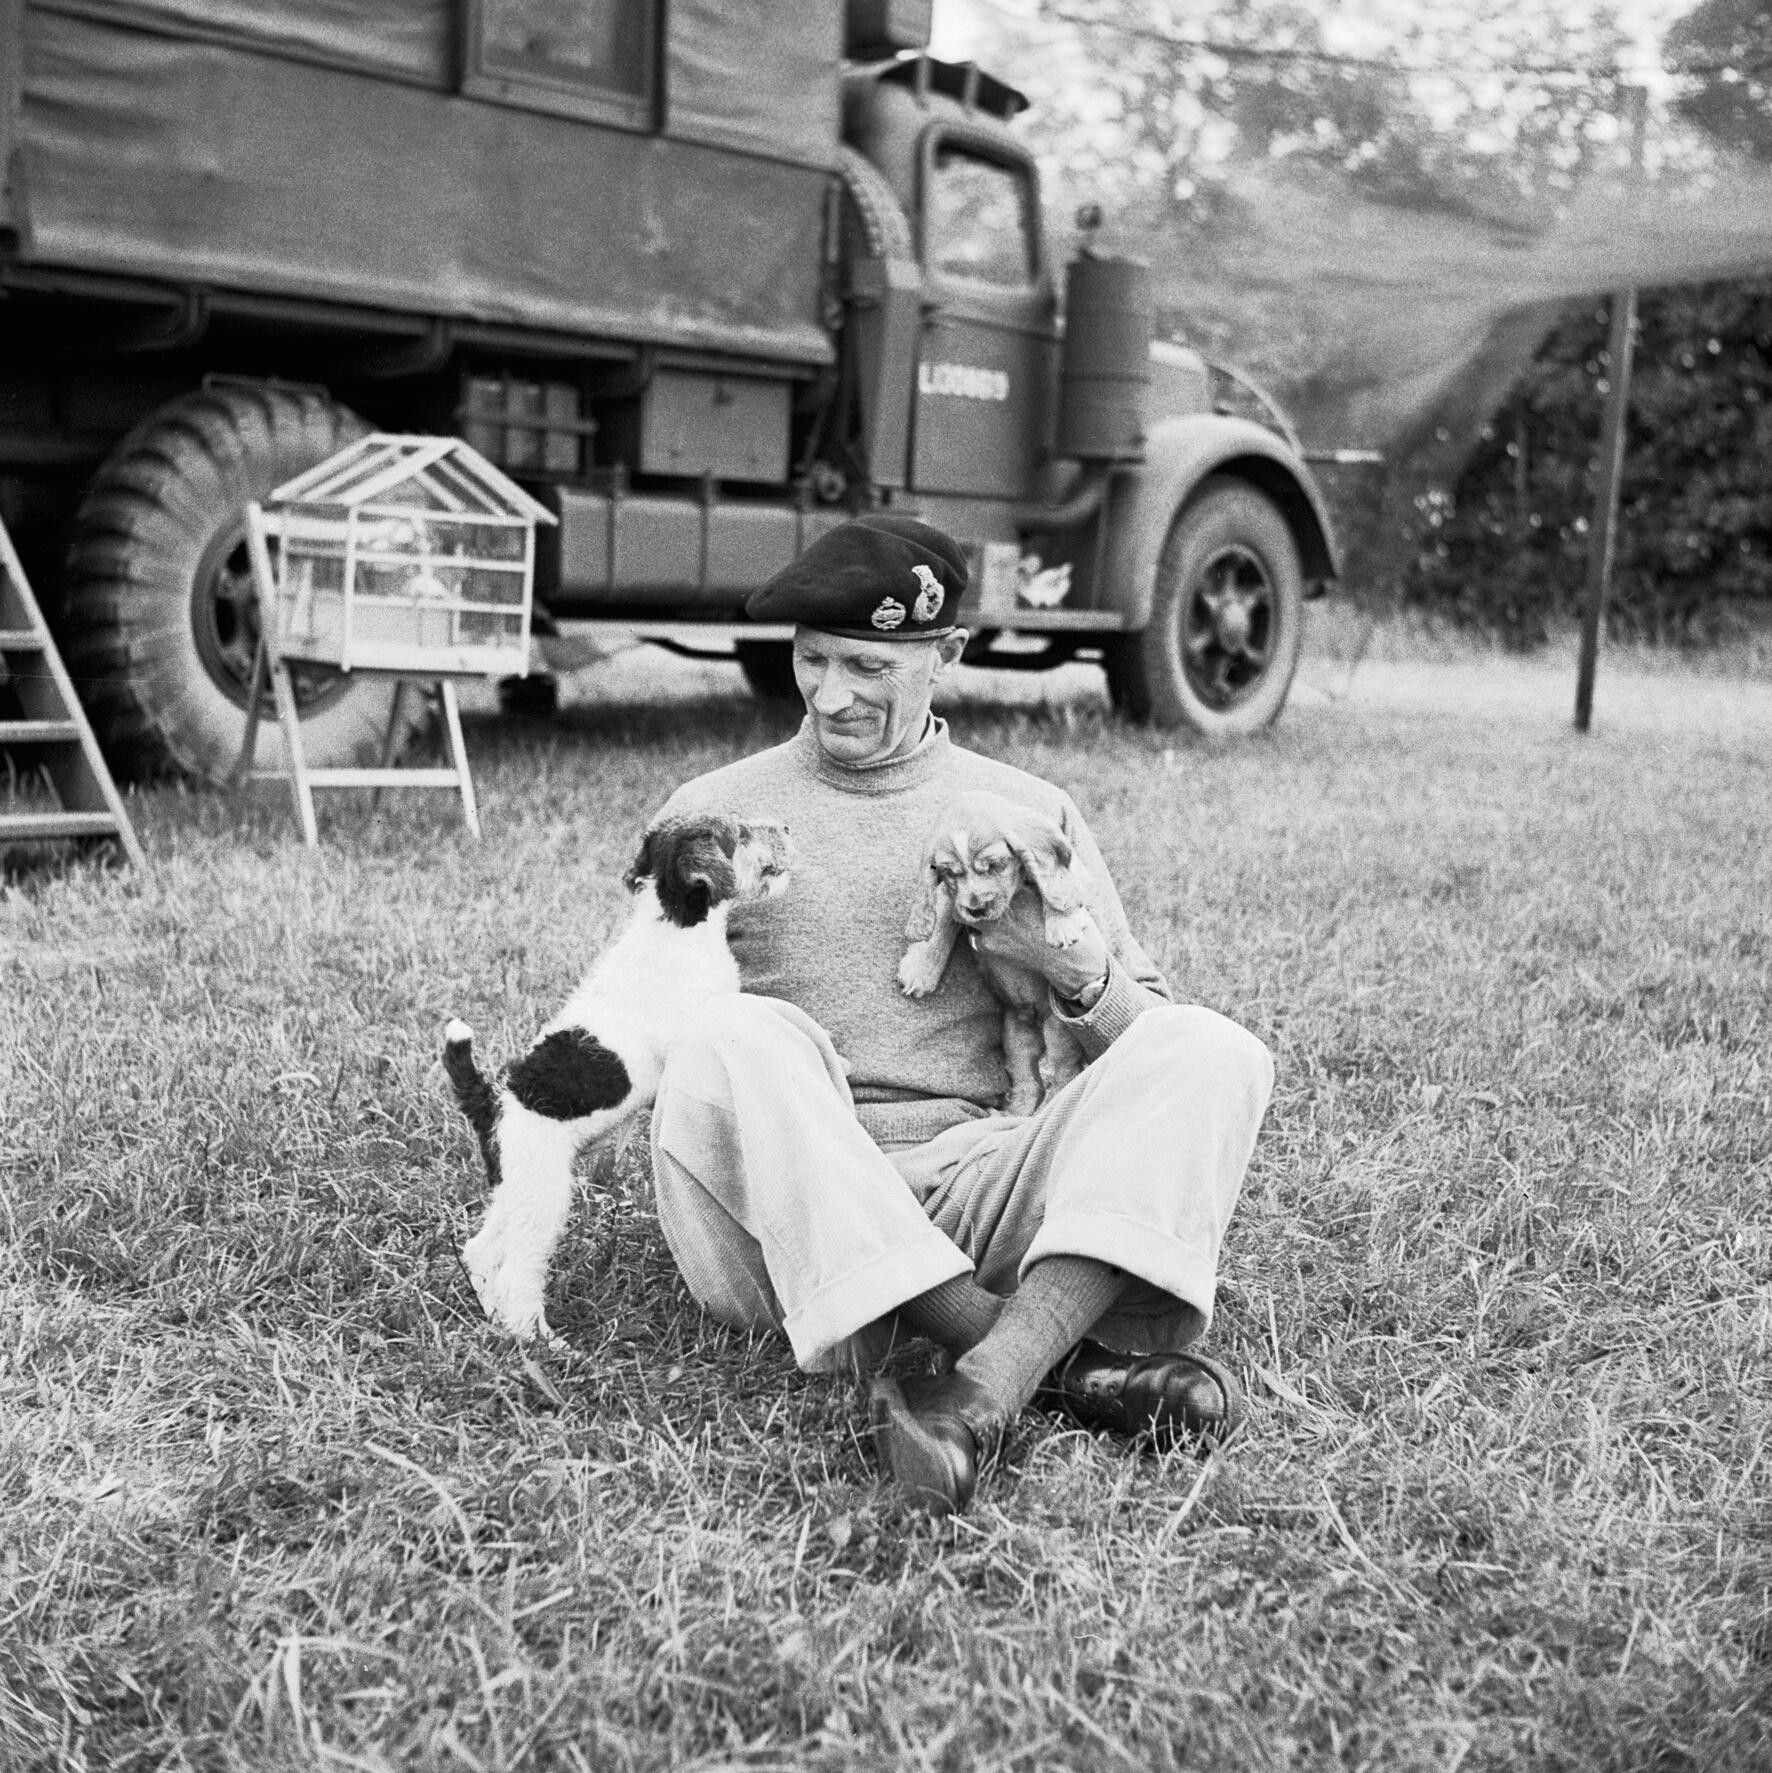 General Bernard Montgomery relaxing with his traveling companions, a fox terrier puppy named “Hitler” and a spaniel puppy named “Rommel,” at his headquarters at Blay, Normandy, France, 6 Jul 1944.